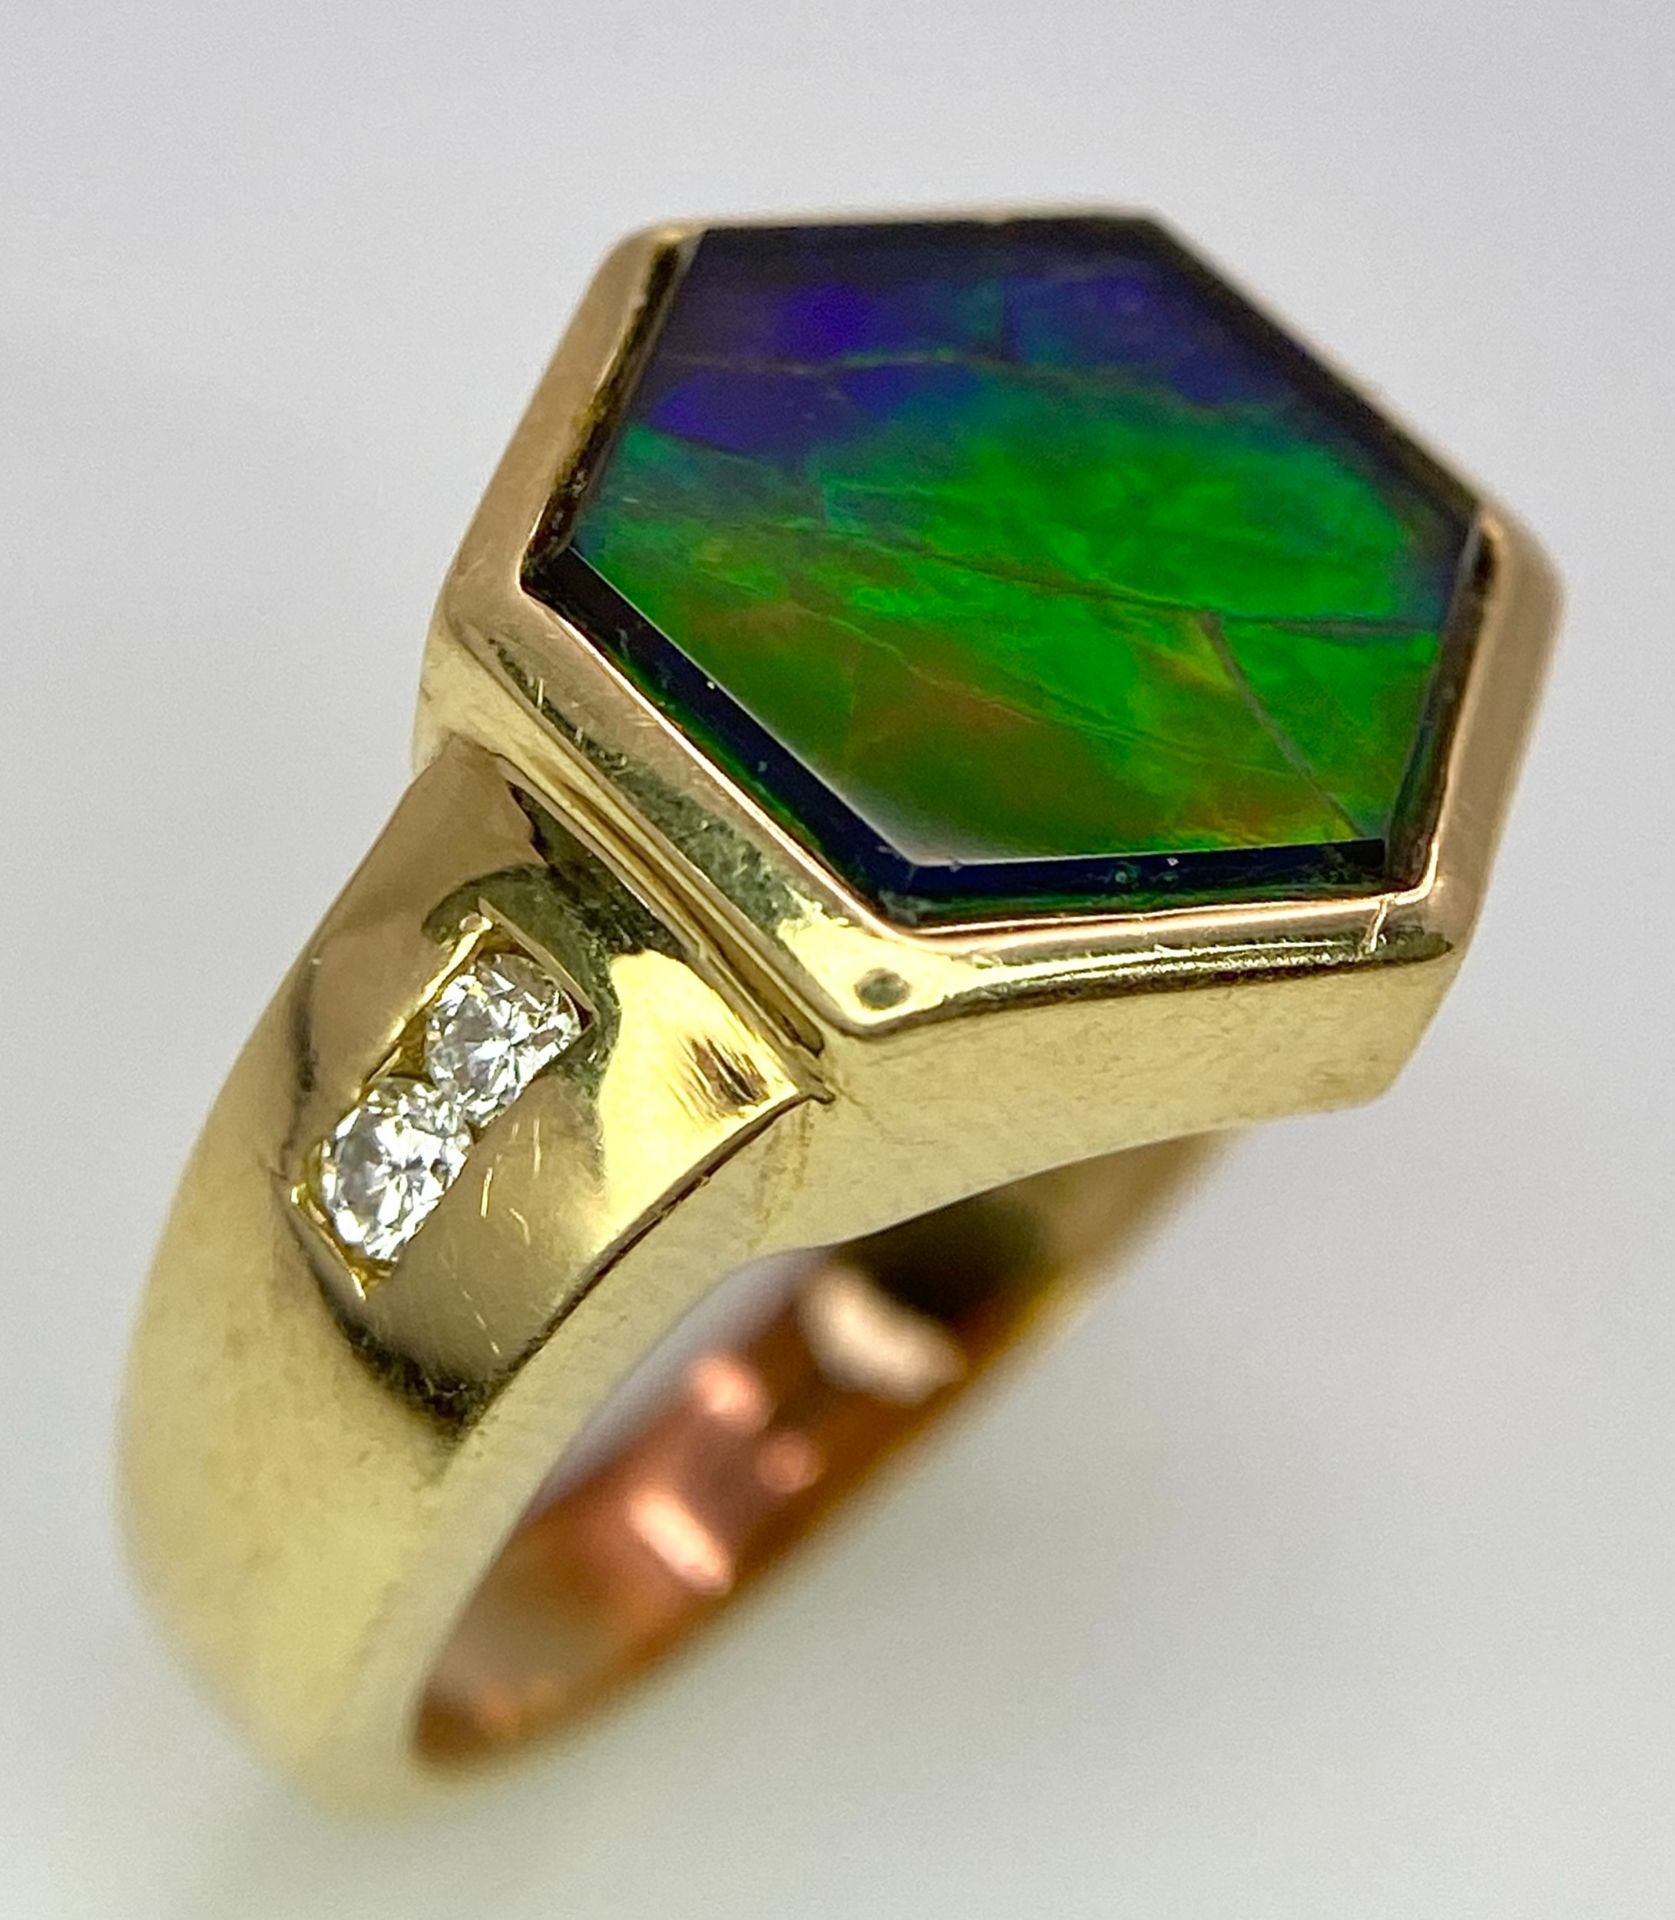 A Very Different, 14K Gold, Ammolite and Diamond Ring. Hexagonal shape. Size L. 6.3g total weight. - Image 3 of 9